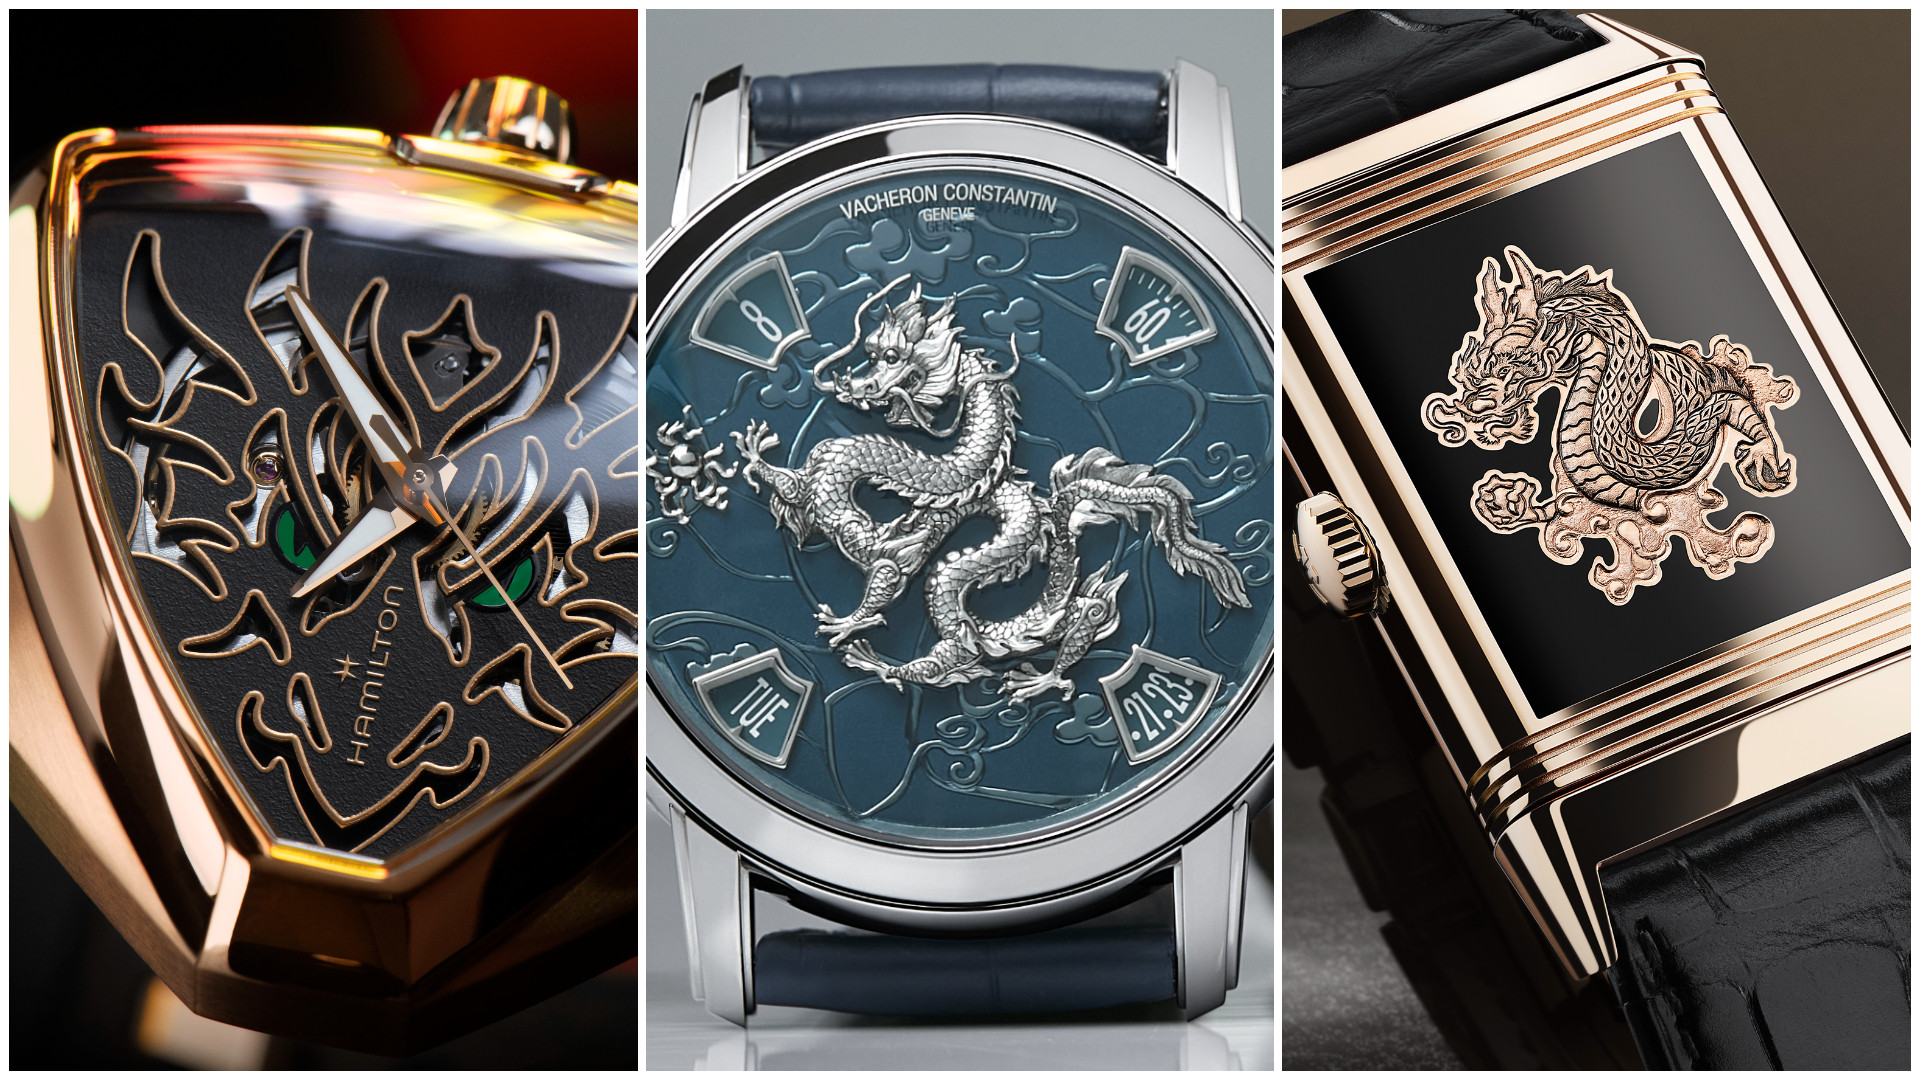 Hamilton, Vacheron Constantin and Jaeger LeCoultre all featured the dragon on their watches for Chinese New Year. Photos: Hamilton, Vacheron Constantin, Jaeger LeCoultre